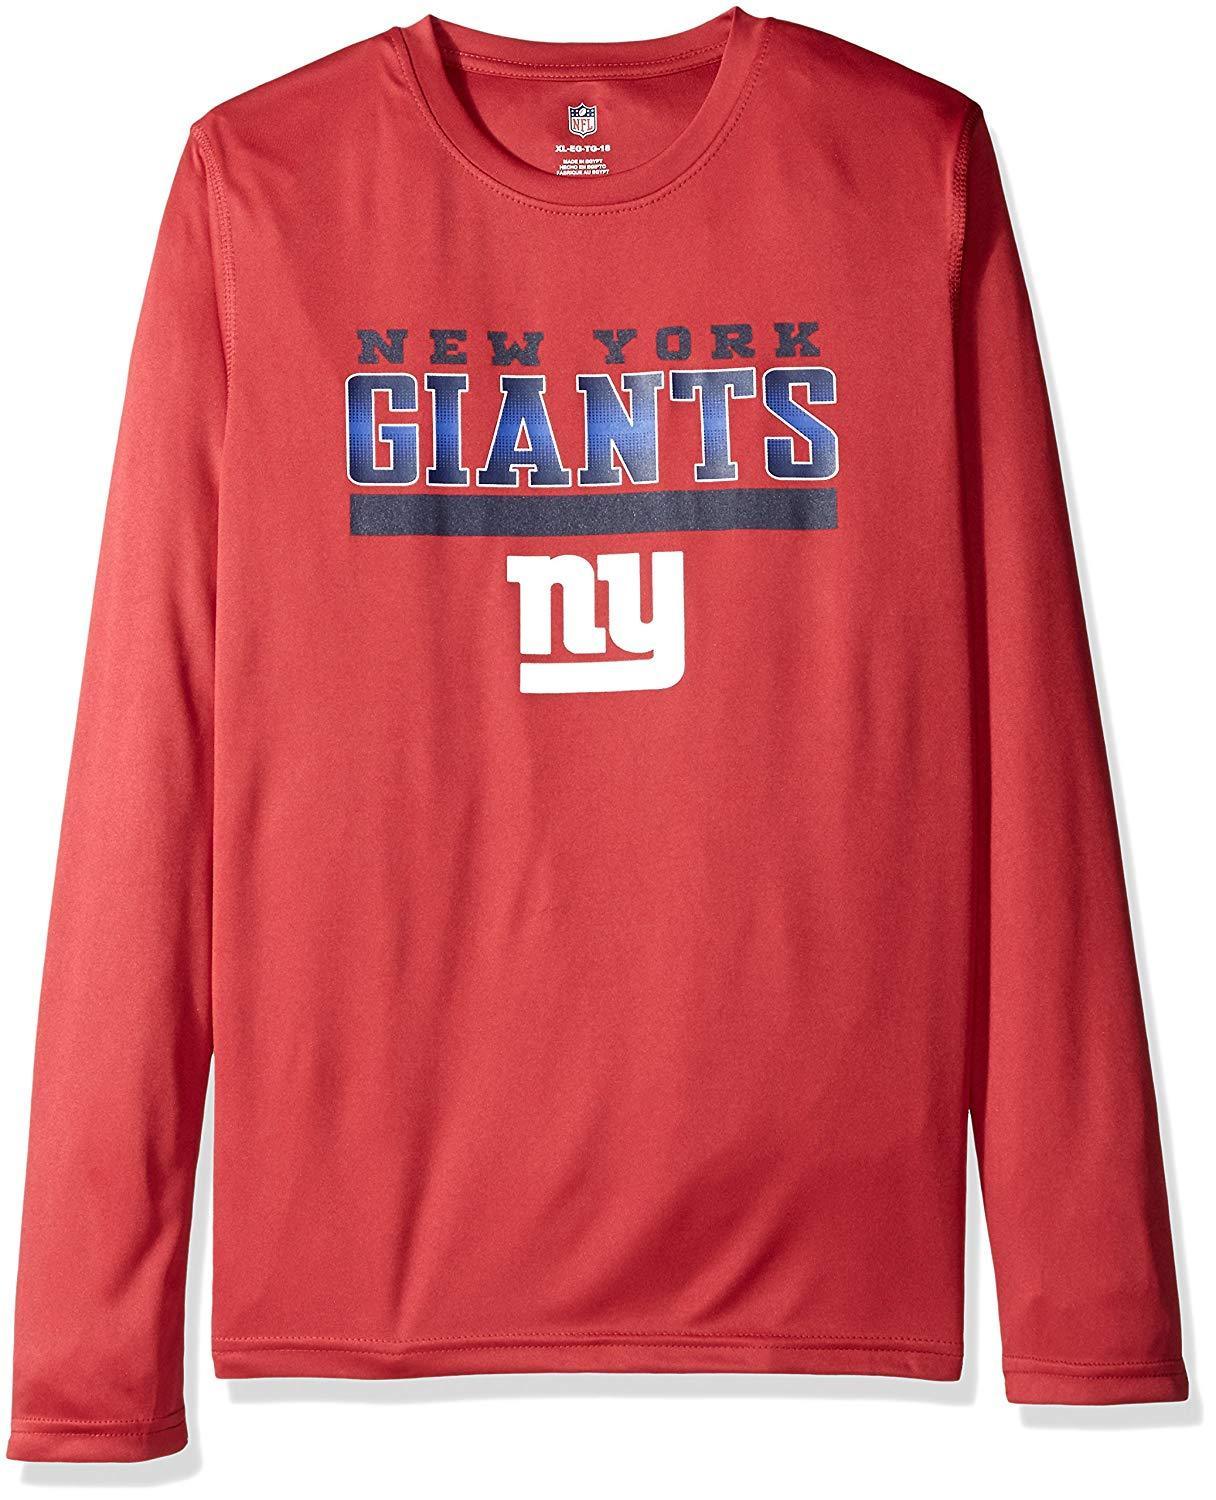 Primary image for NFL New York Giants Boys Outerstuff Long Sleeve Performance Tee, Size XL/16/18